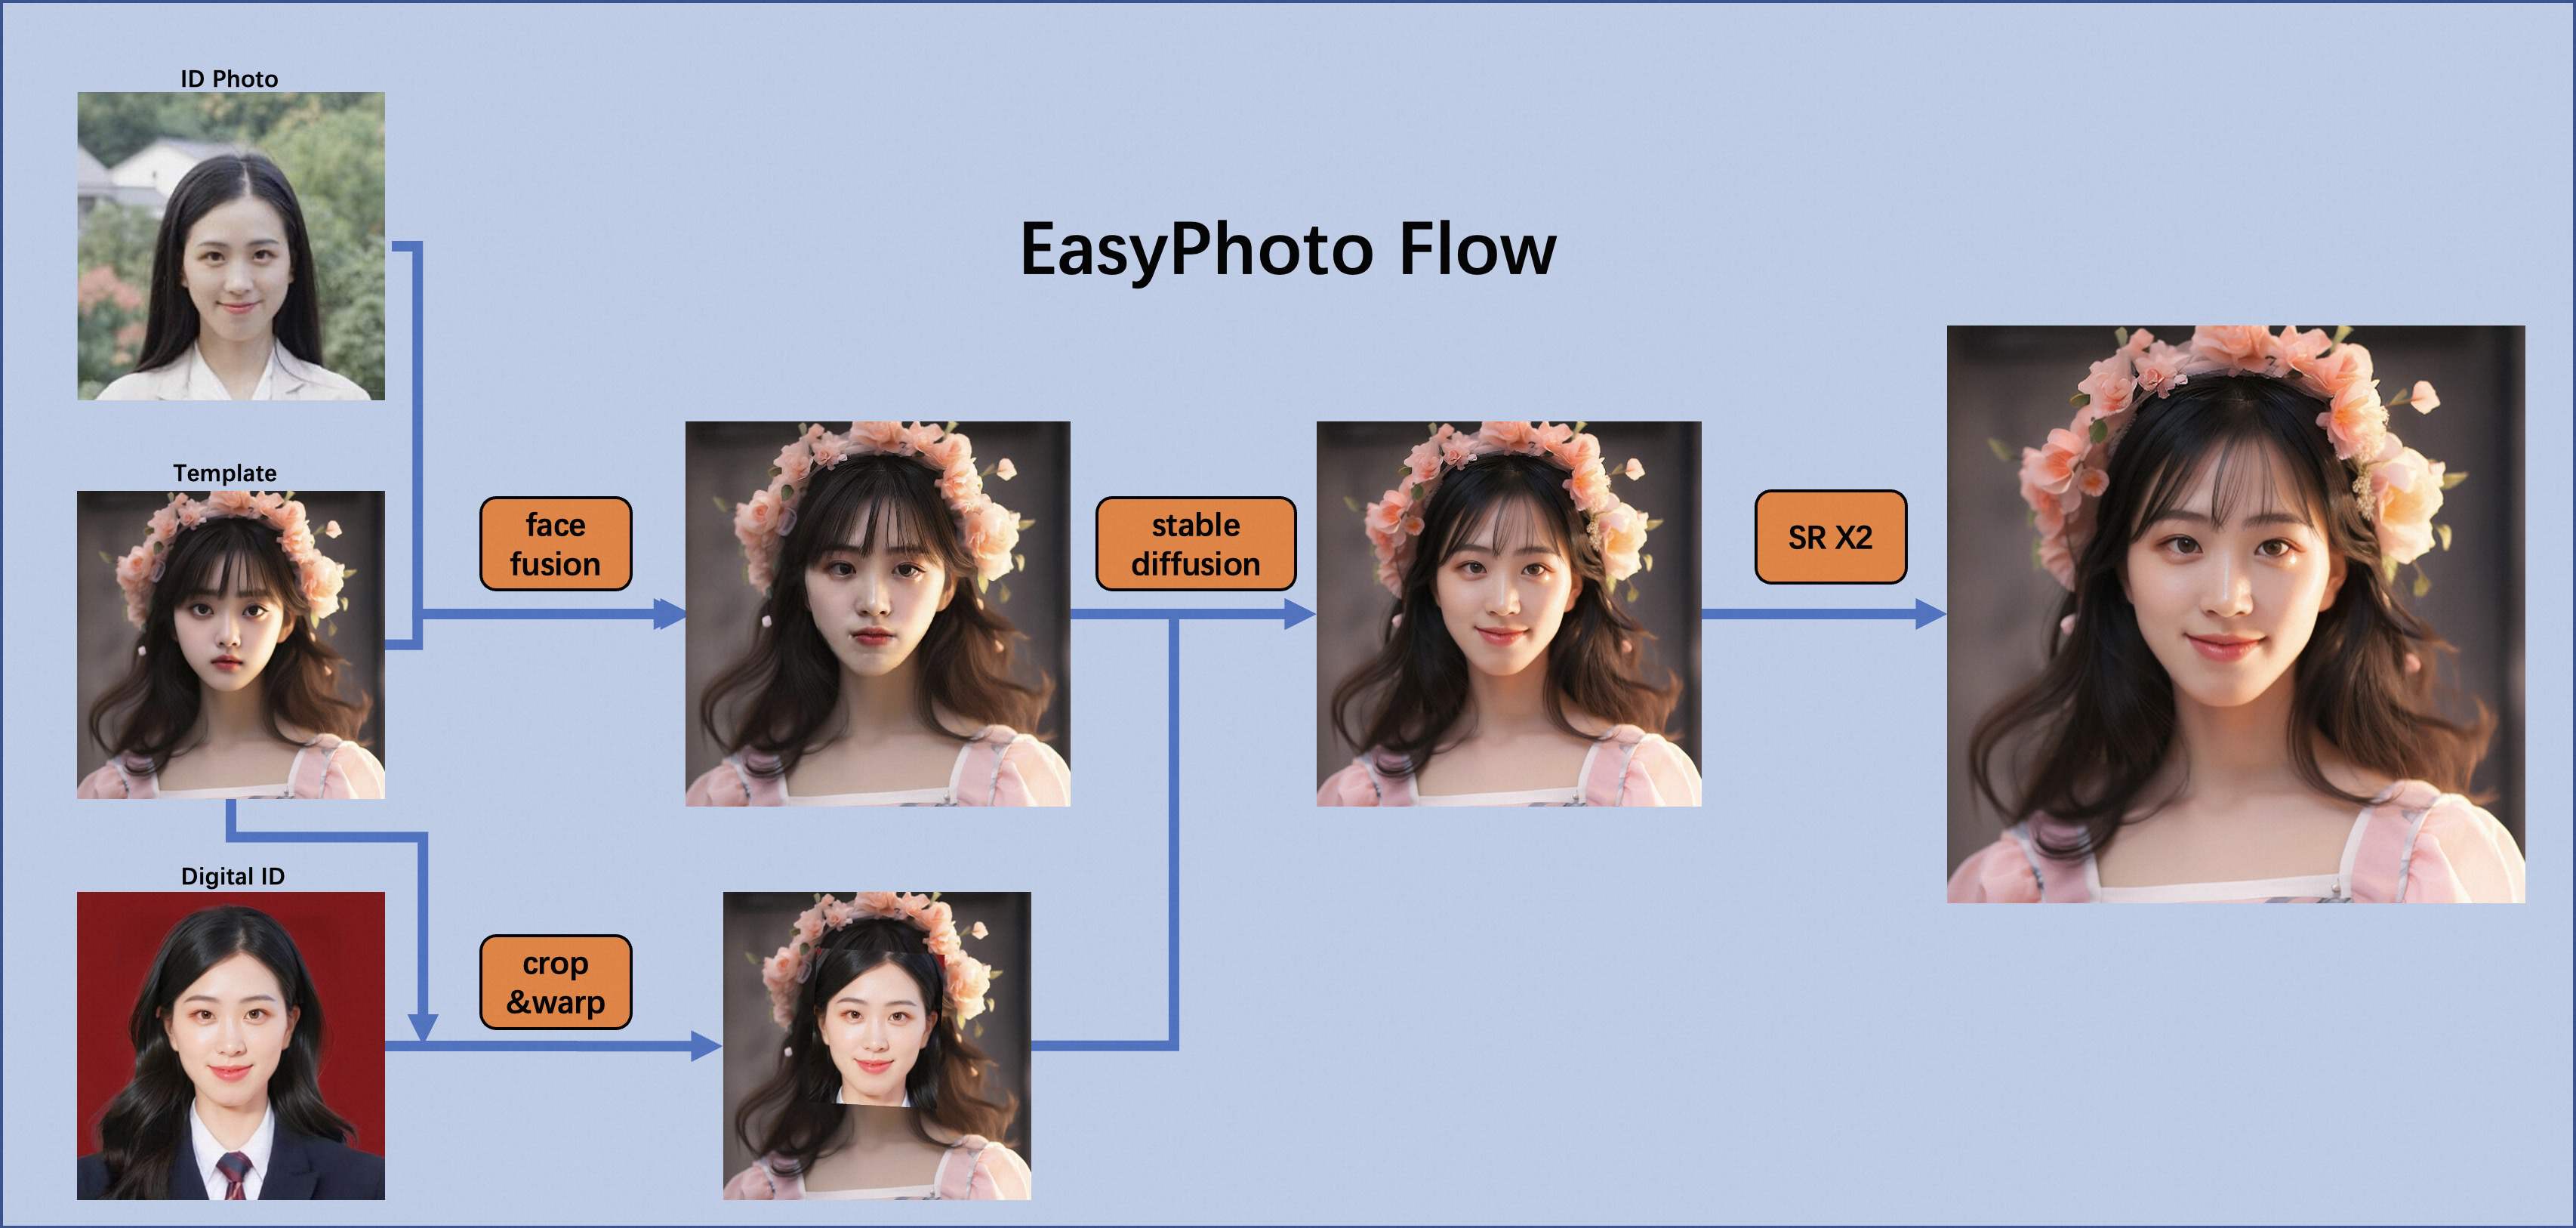 easyphoto-overview